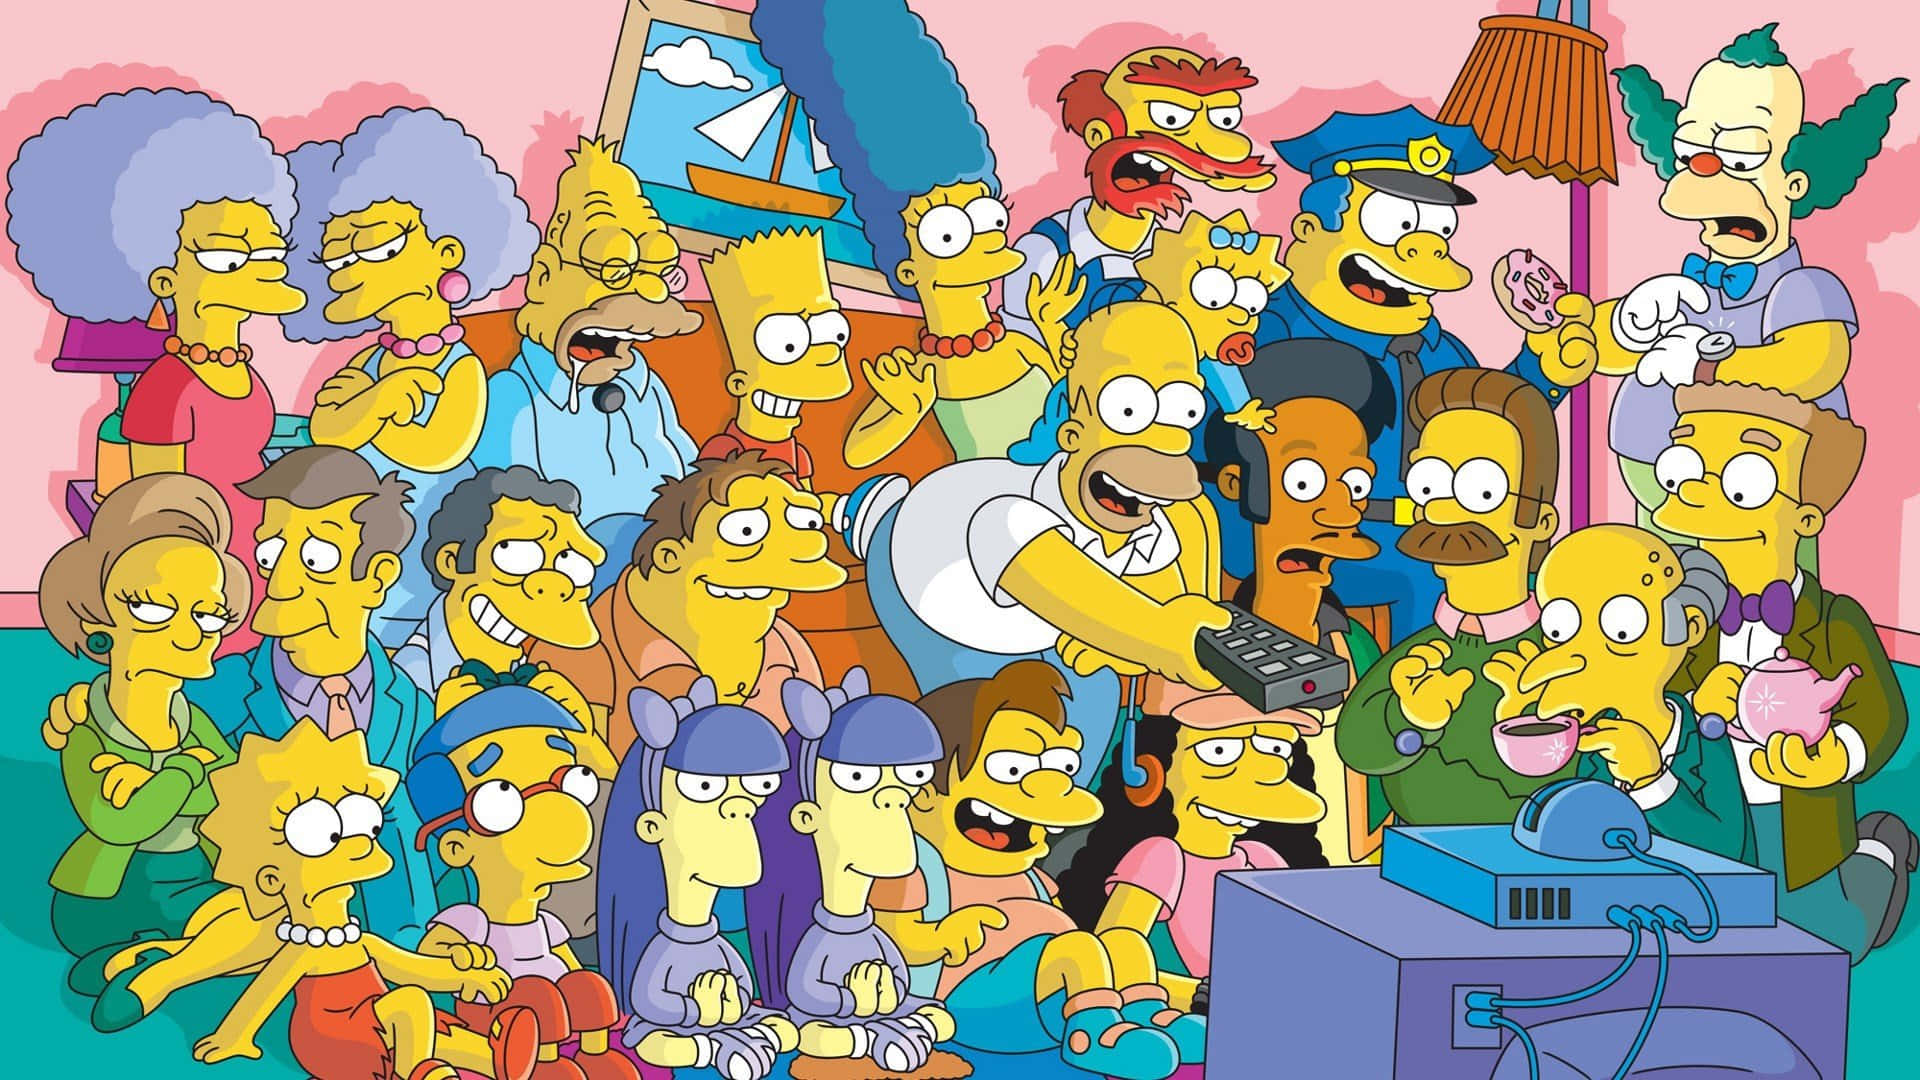 The iconic Simpsons family gathered together in their living room